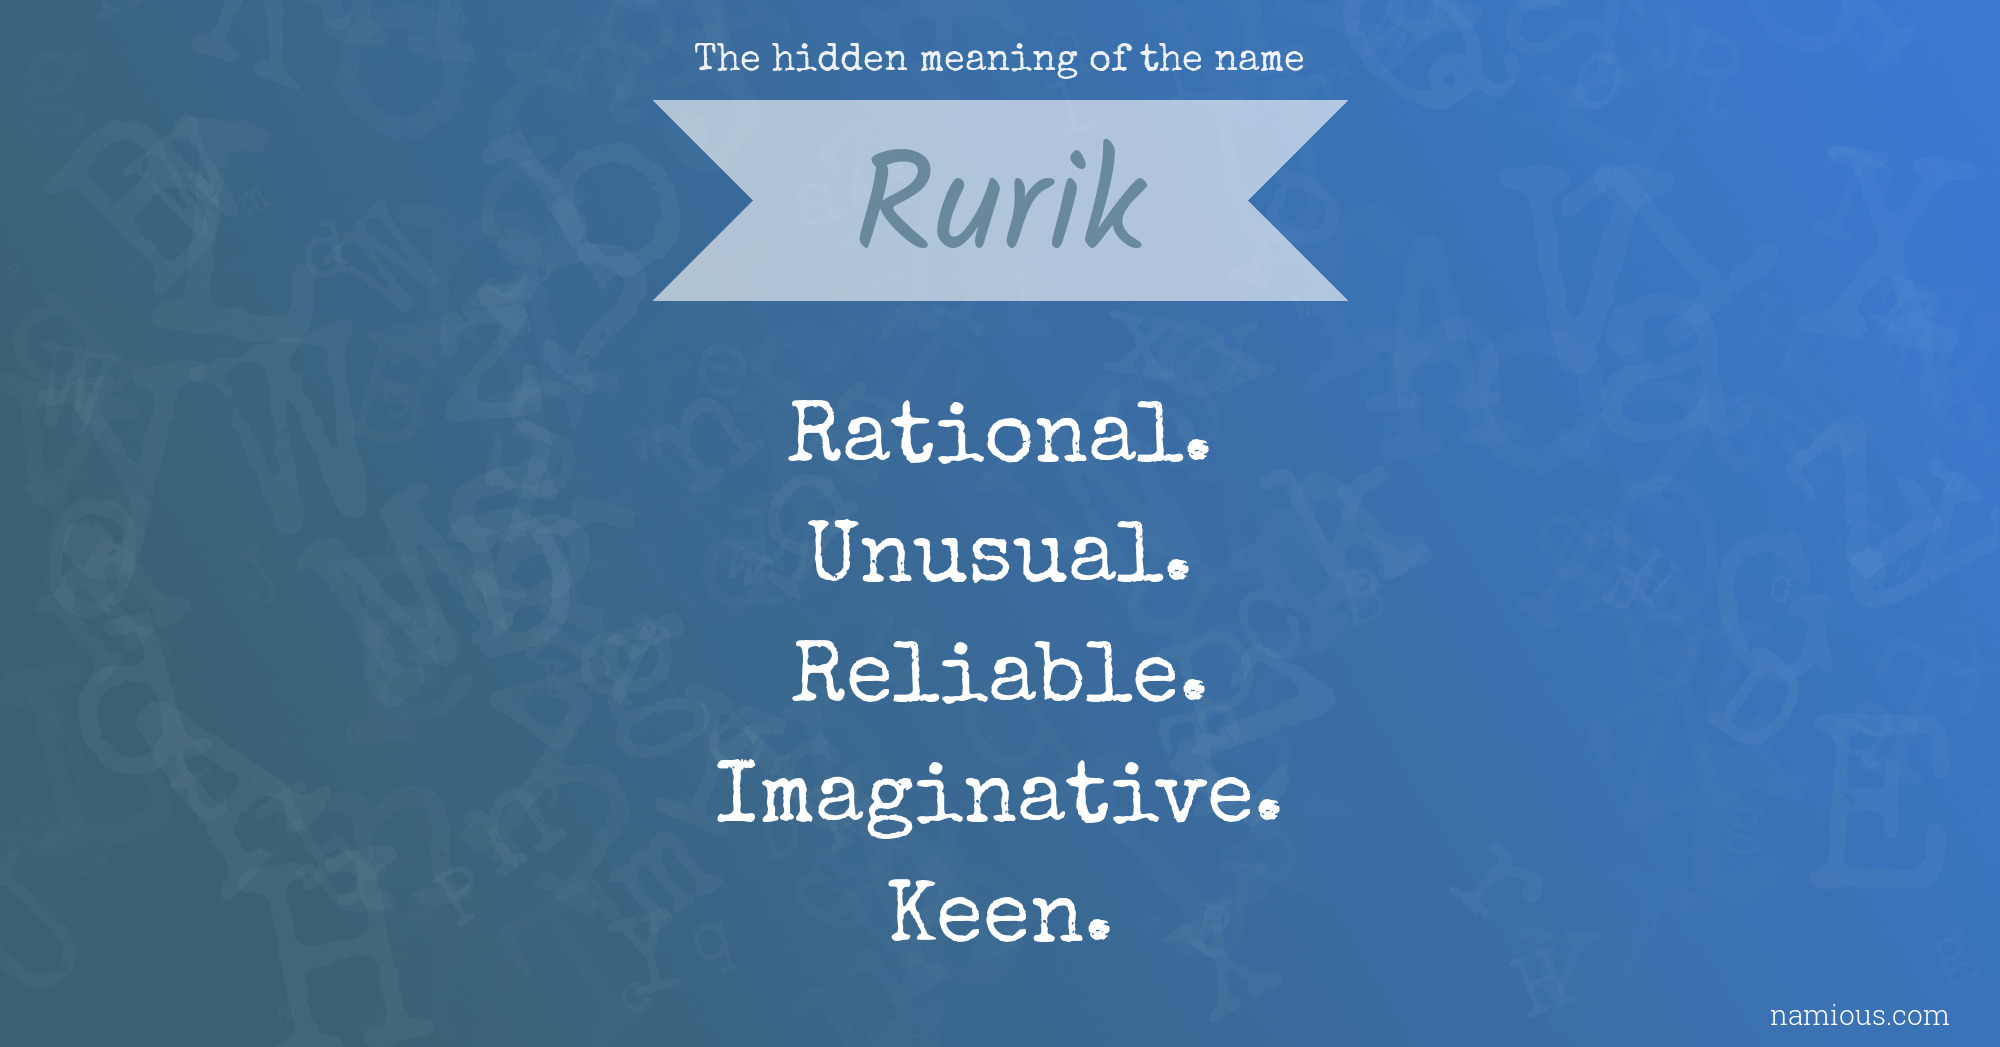 The hidden meaning of the name Rurik